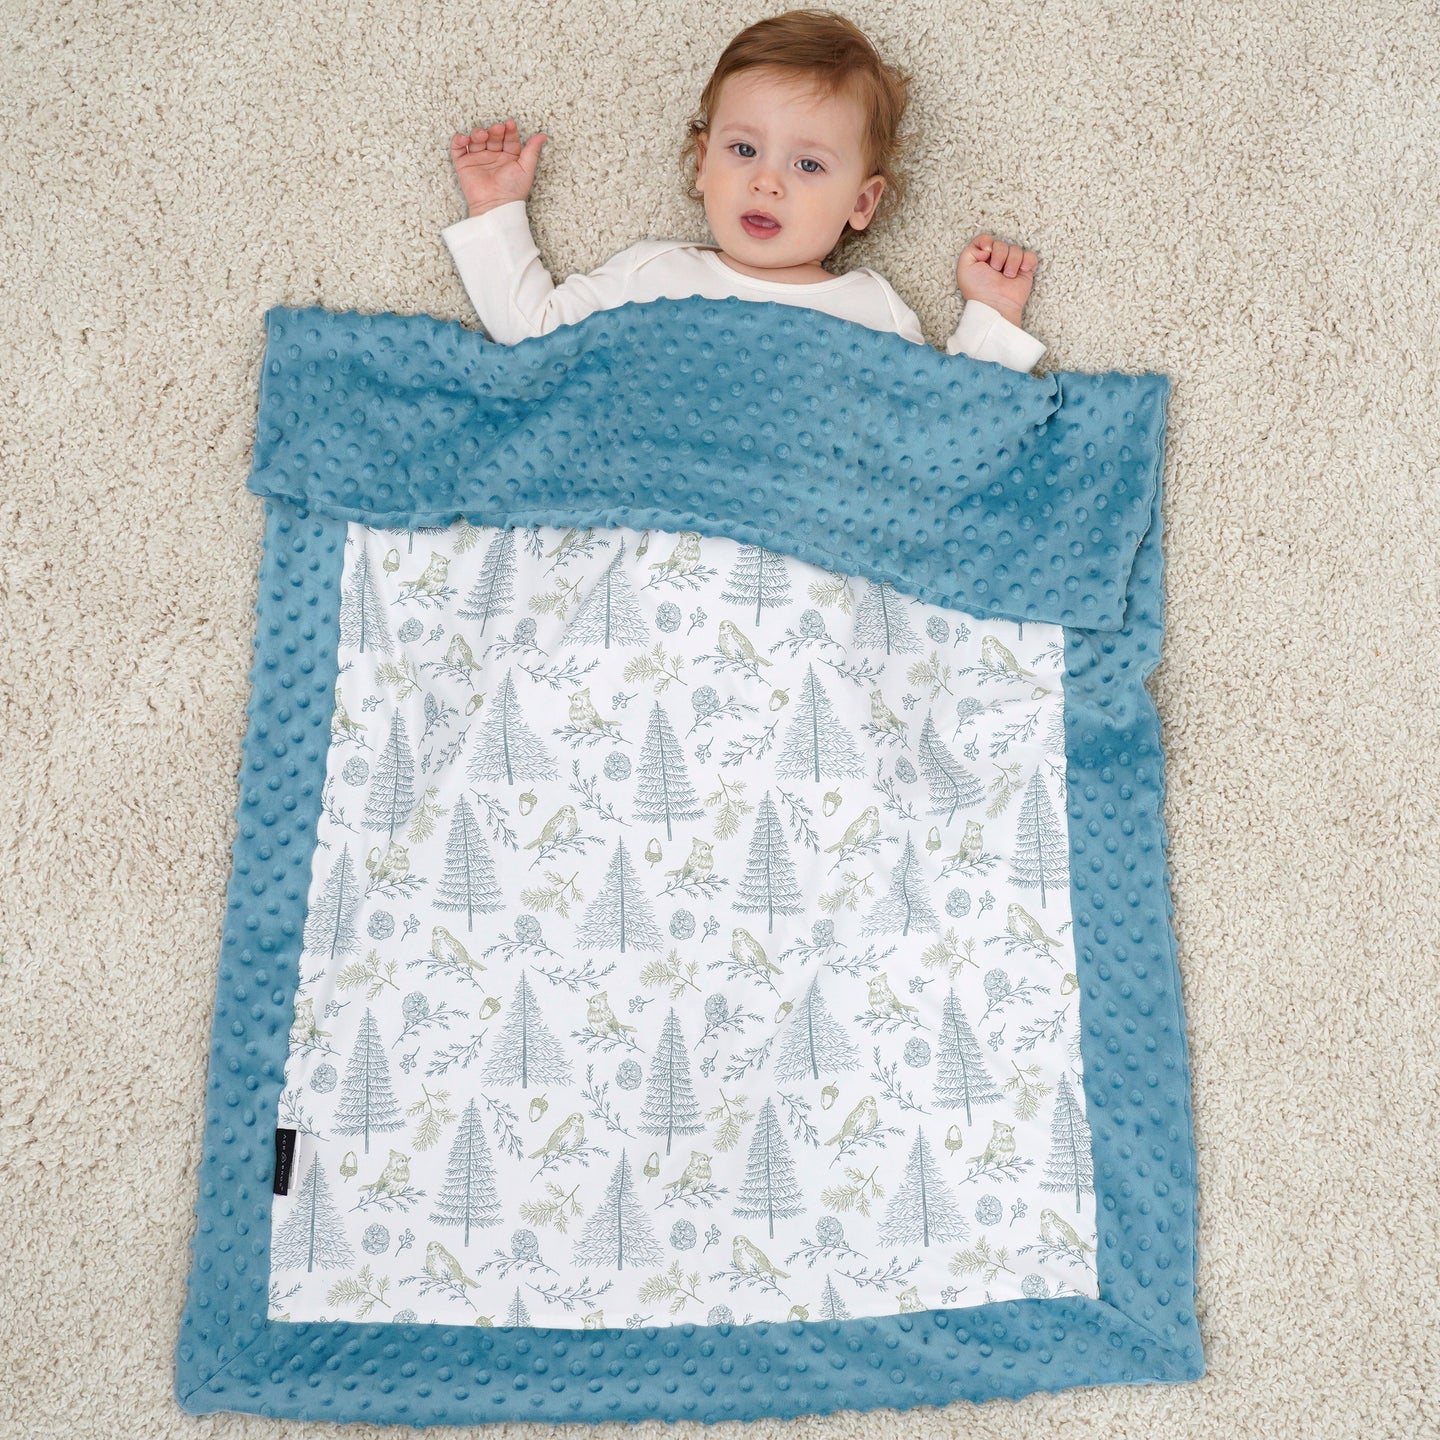 ACRABROS Baby Blankets Double Layer Dotted Backing 30X40 Inches,Pine Forest